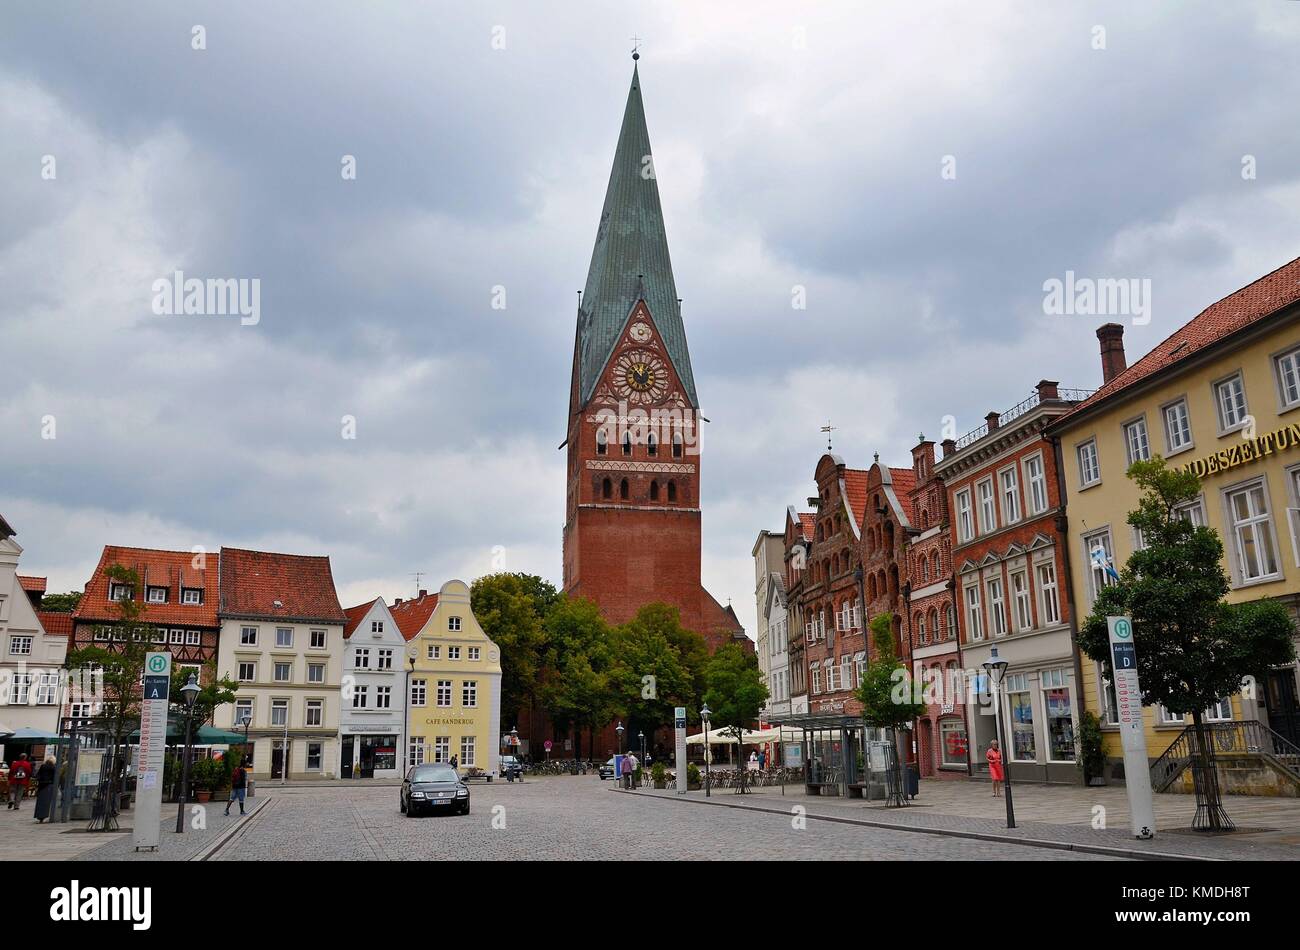 The medieval and pictoresque town of Lüneburg (Niedersachsen, Germany) Stock Photo